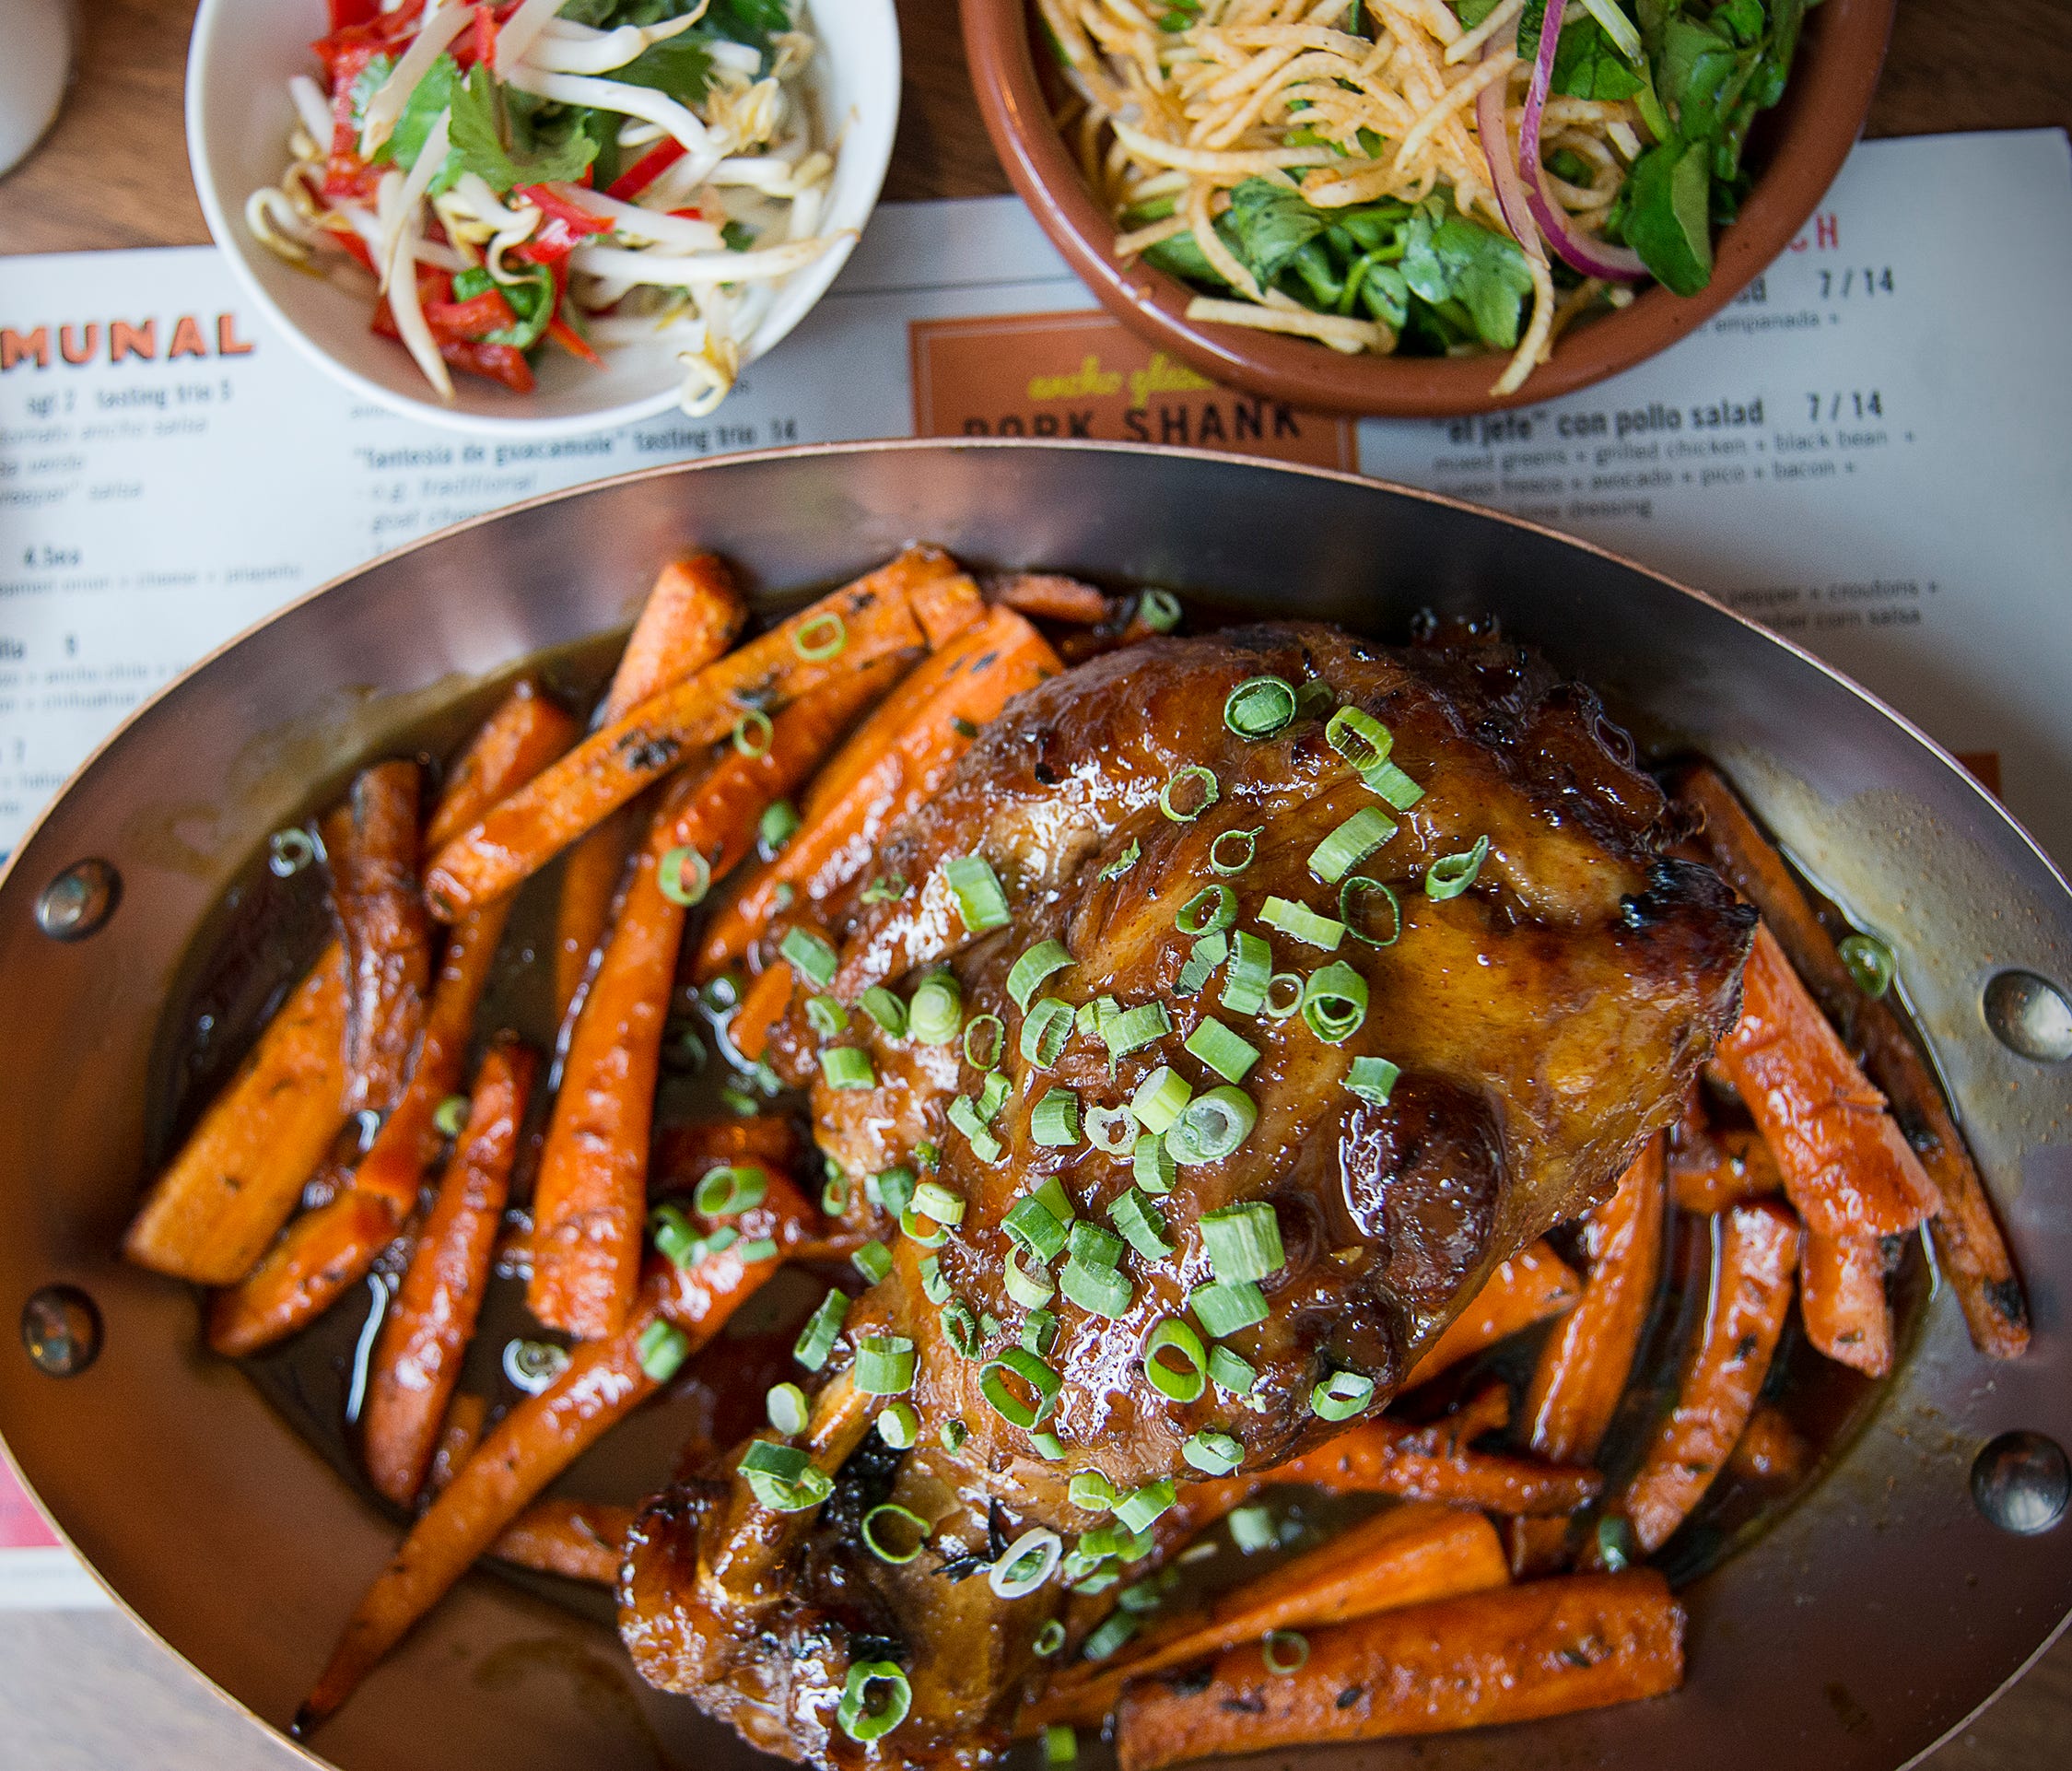 Part of Boca Restaurant Group, Nada is a popular spot in the city's central business district, offering trendy Mexican fare in an upscale setting. A recent menu addition is the ancho glazed pork shank, a massive chunk of meat that's meant for sharing